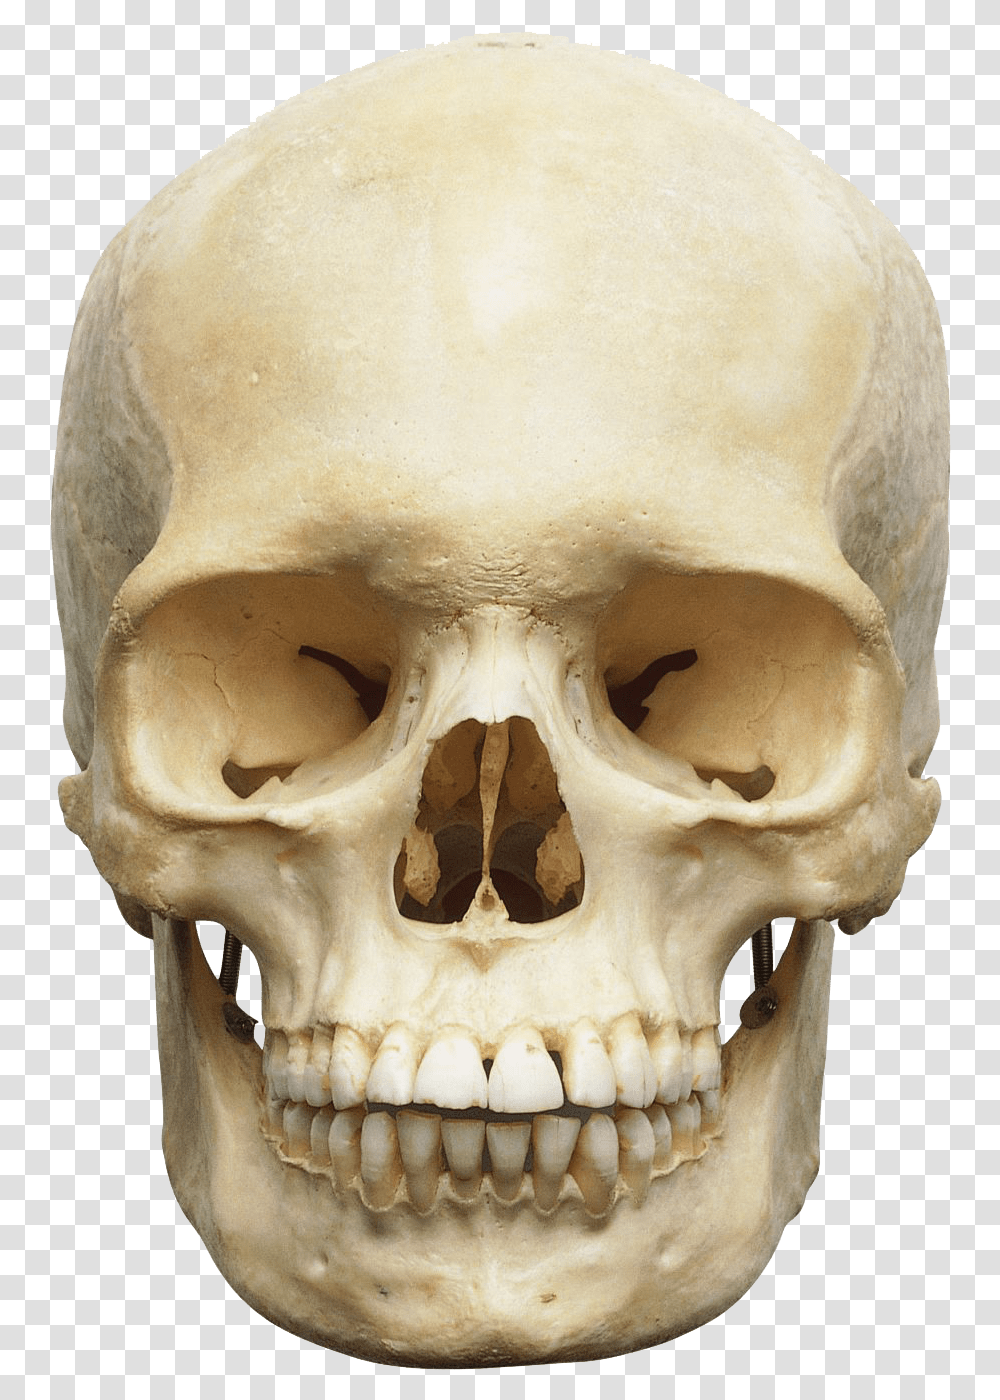 Skull Image, Jaw, Head, Teeth, Mouth Transparent Png